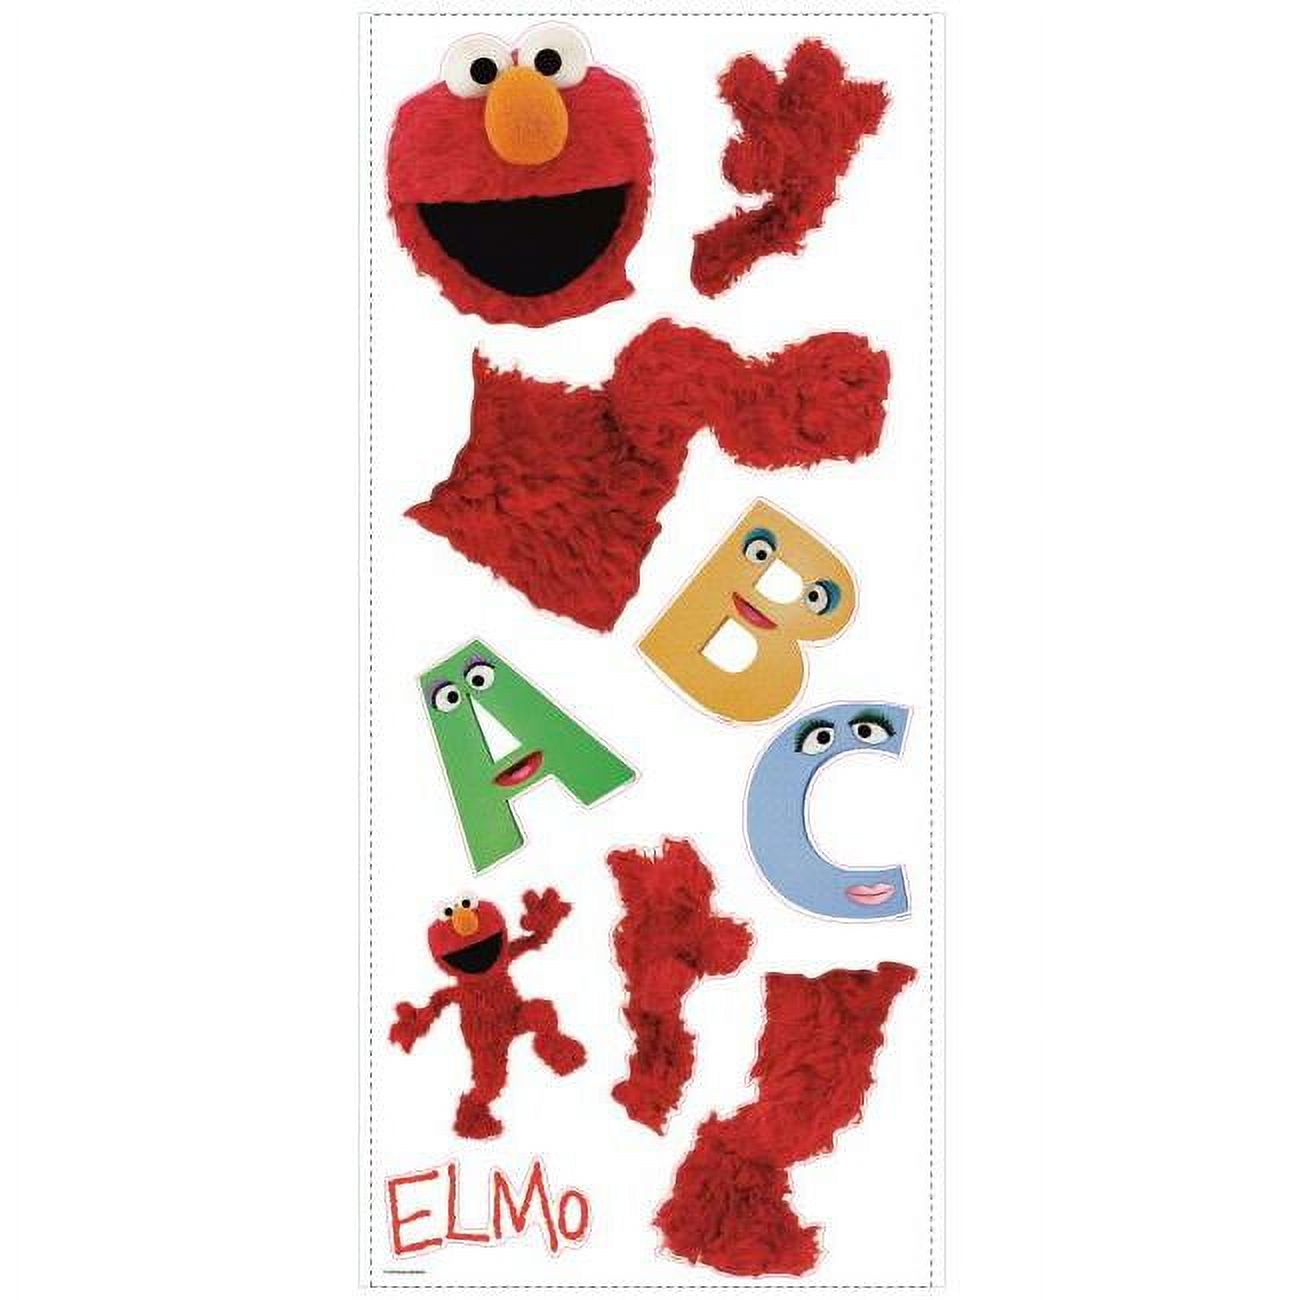 Elmo Giant Wall Decal - image 5 of 6